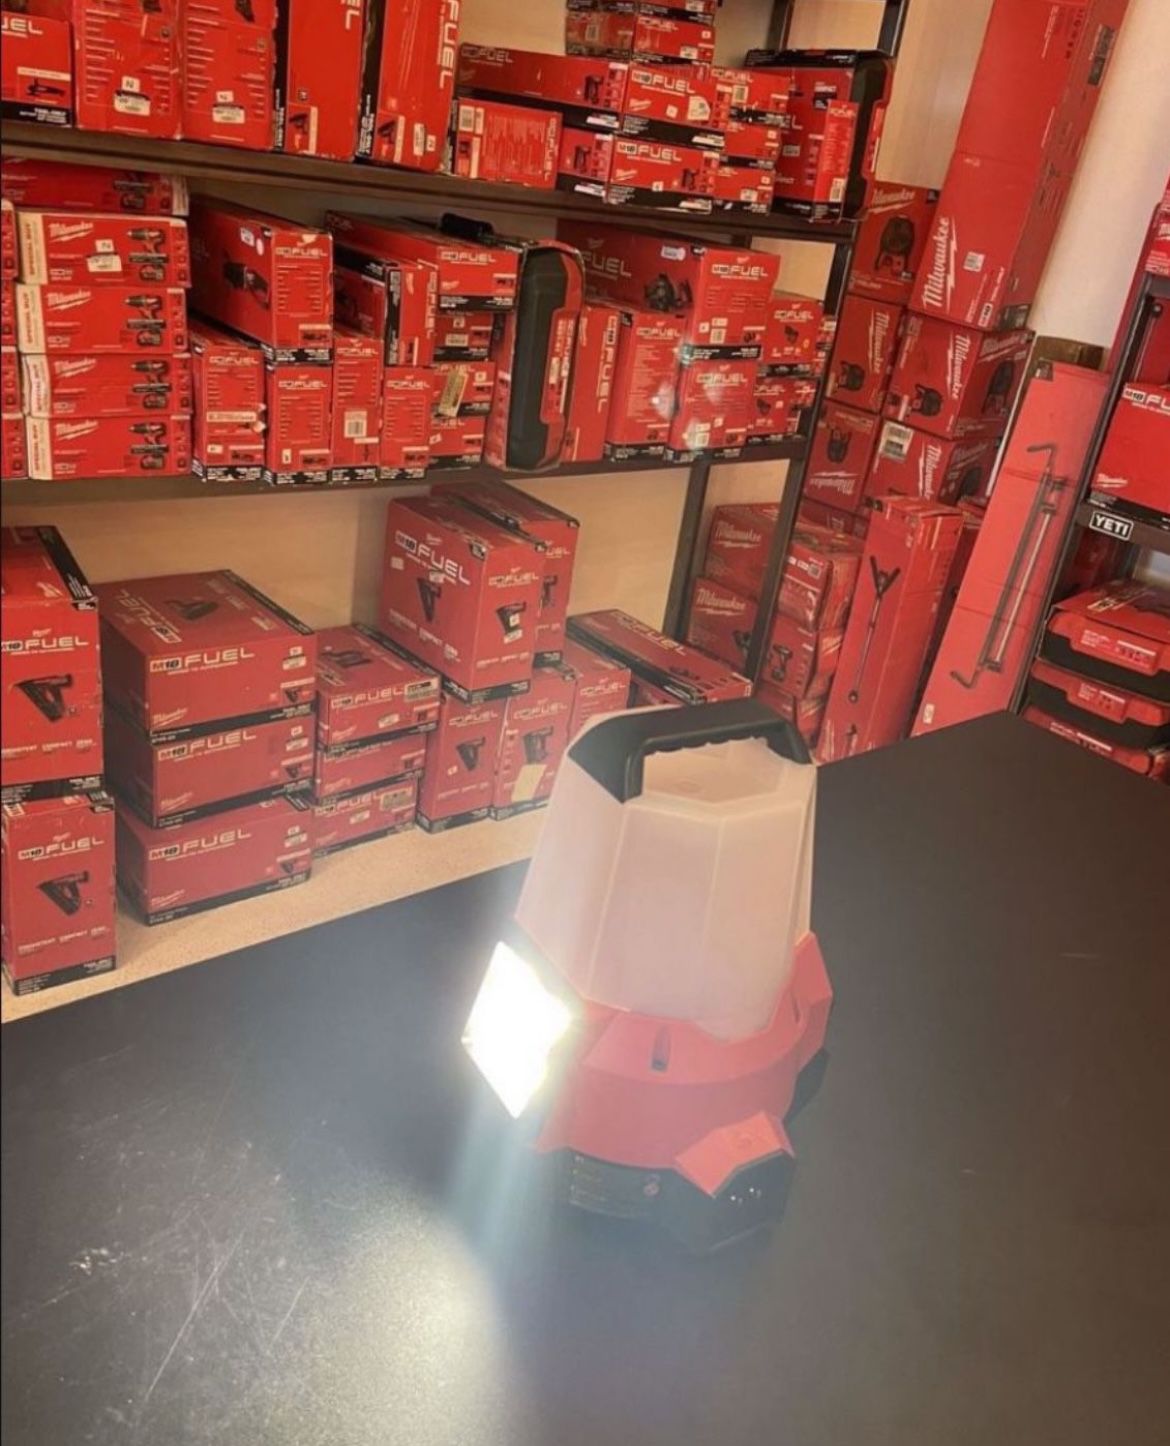 MILWAUKEE M18 18-Volt 2200 Lumens Cordless Radius LED Compact Site Light  with Flood Mode (Tool-Only)……..2144-20 for Sale in North Las Vegas, NV  OfferUp